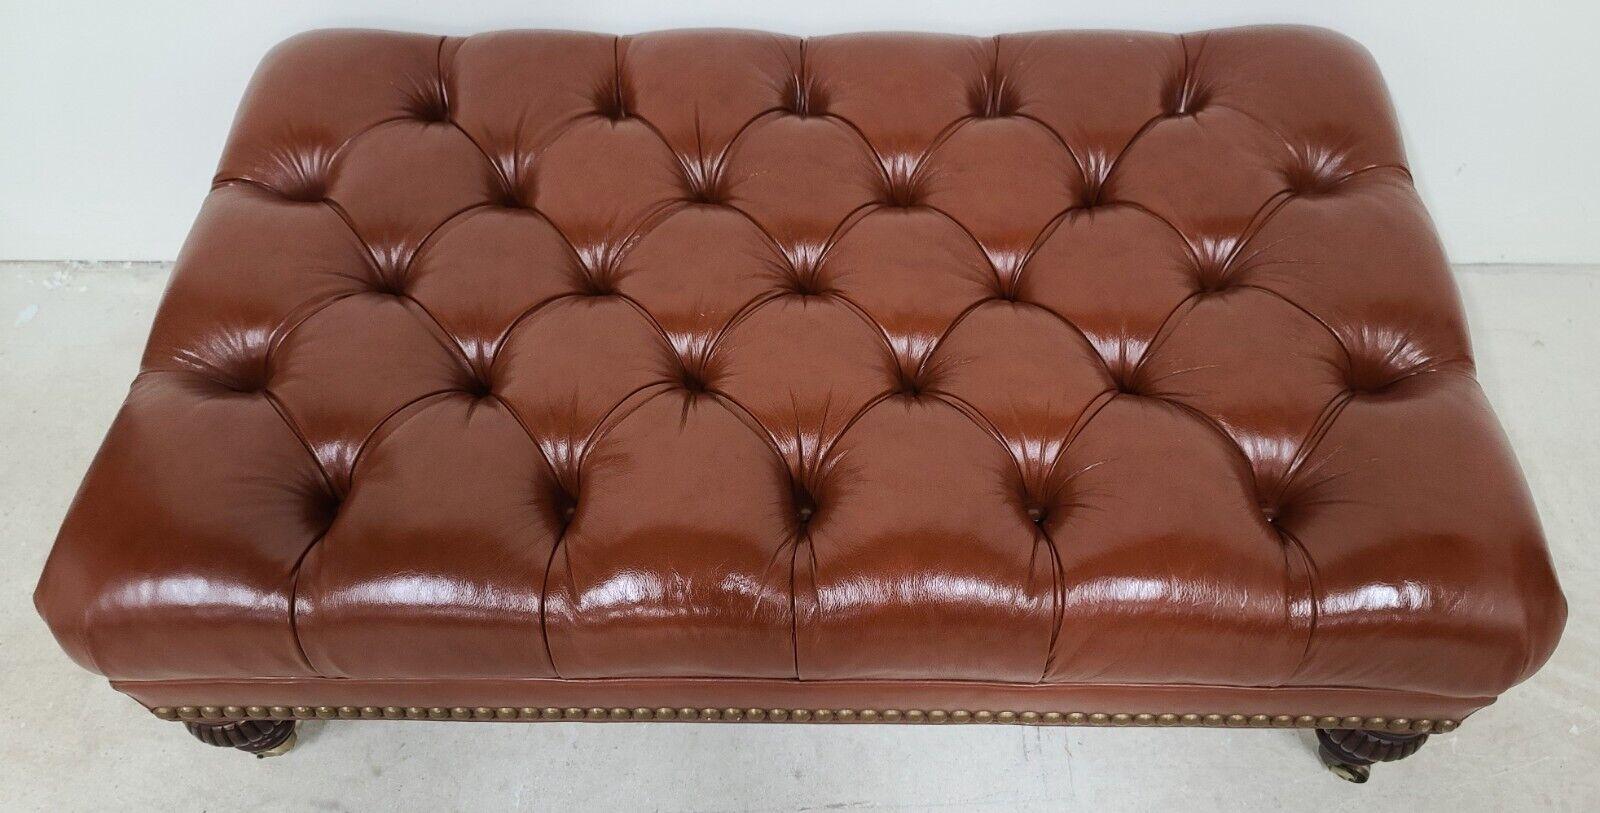 For FULL item description be sure to click on CONTINUE READING at the bottom of this listing.
Offering one of our recent palm beach estate fine furniture acquisitions of a
large chesterfield tufted real leather rolling ottoman footstool coffee